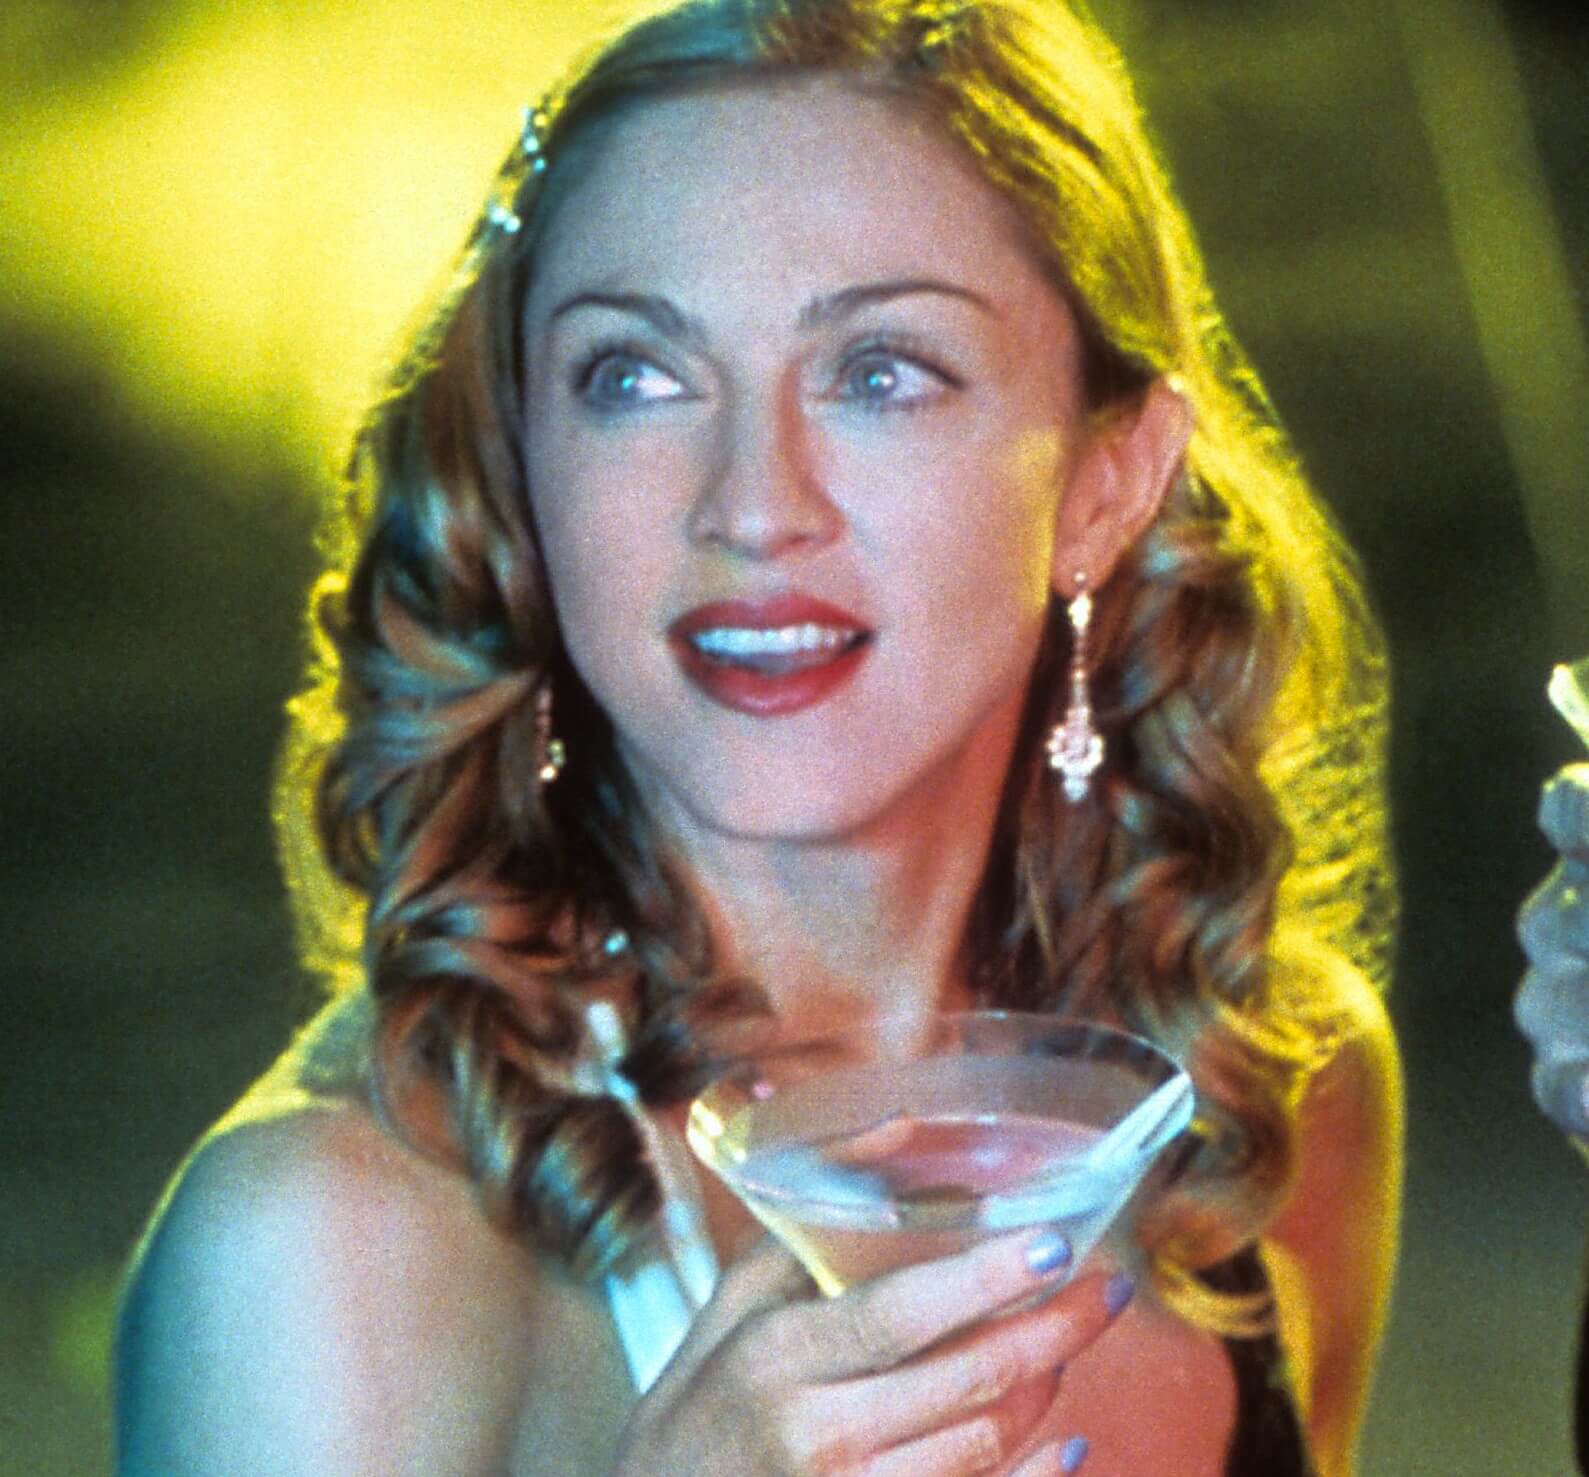 Madonna in the movie 'The Next Best Thing'